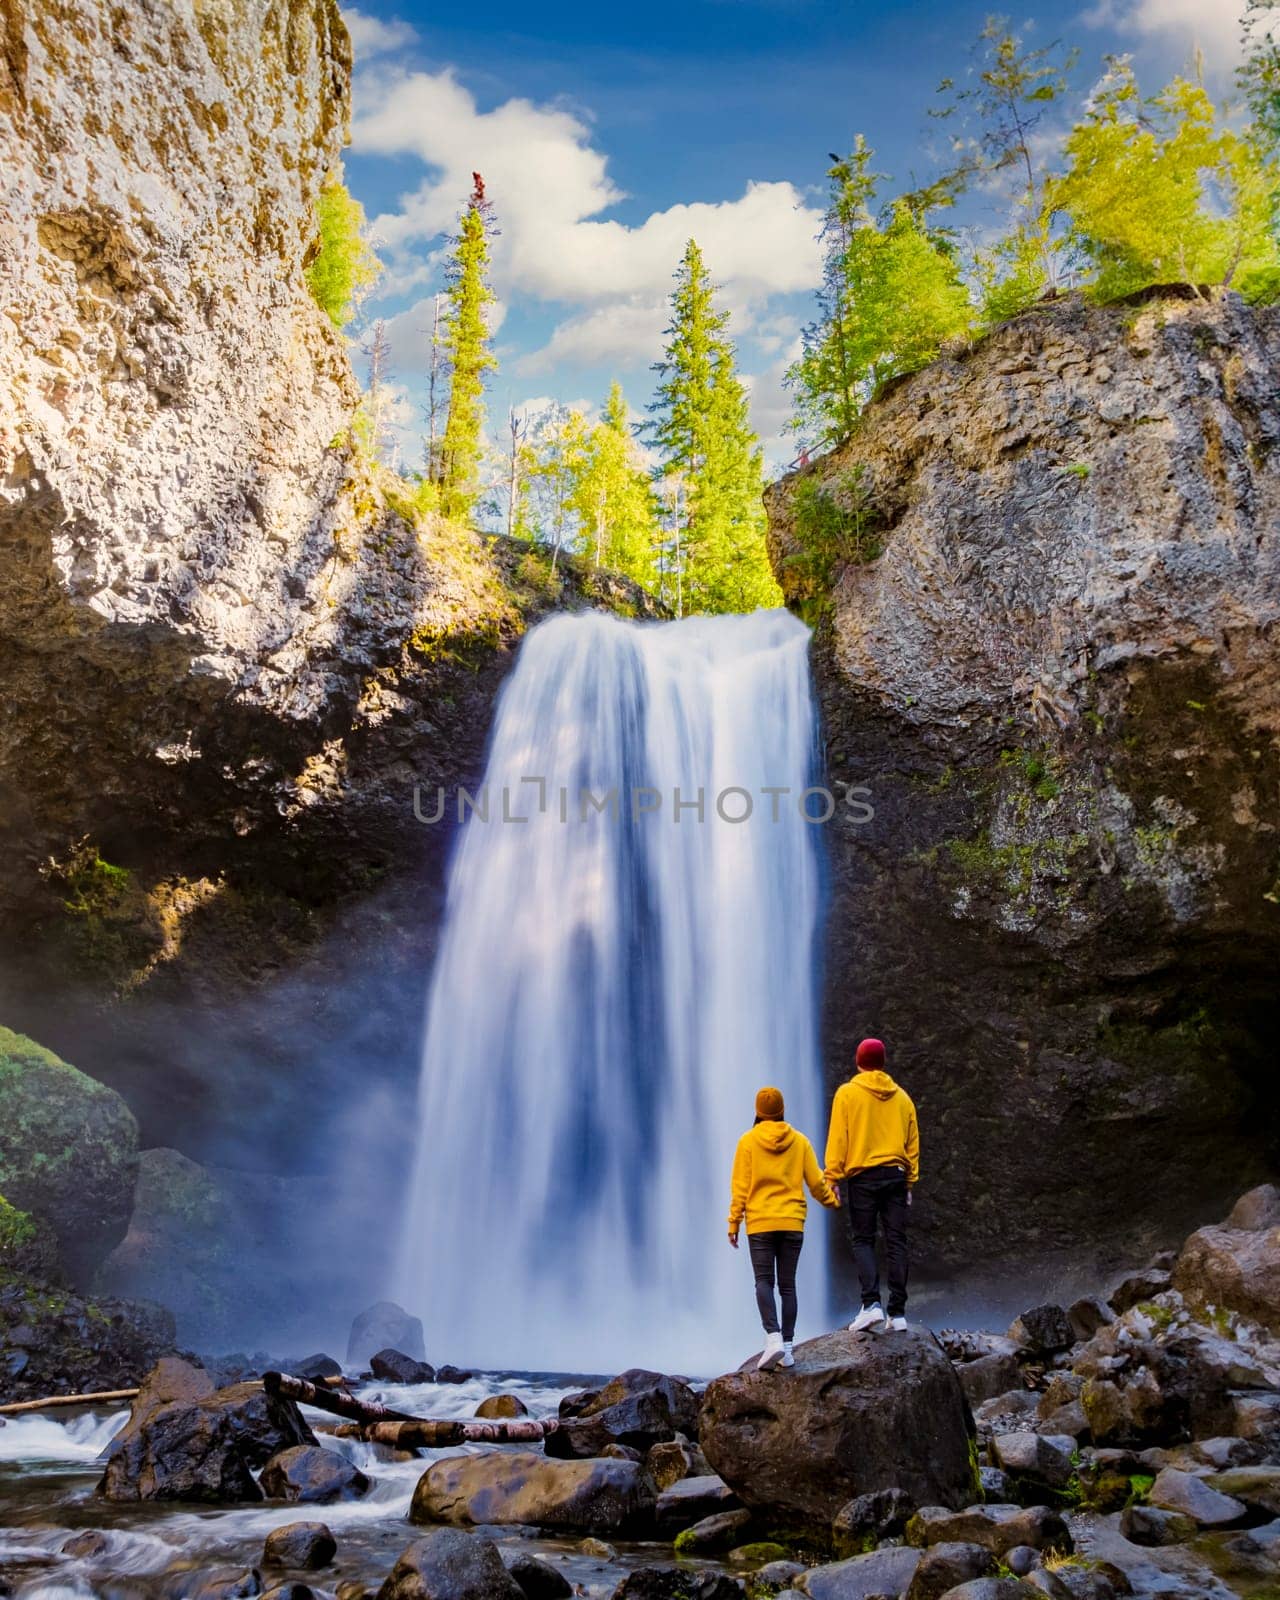 Moul Falls, the most famous waterfall in Wells Gray Provincial Park in British Columbia, Canada by fokkebok